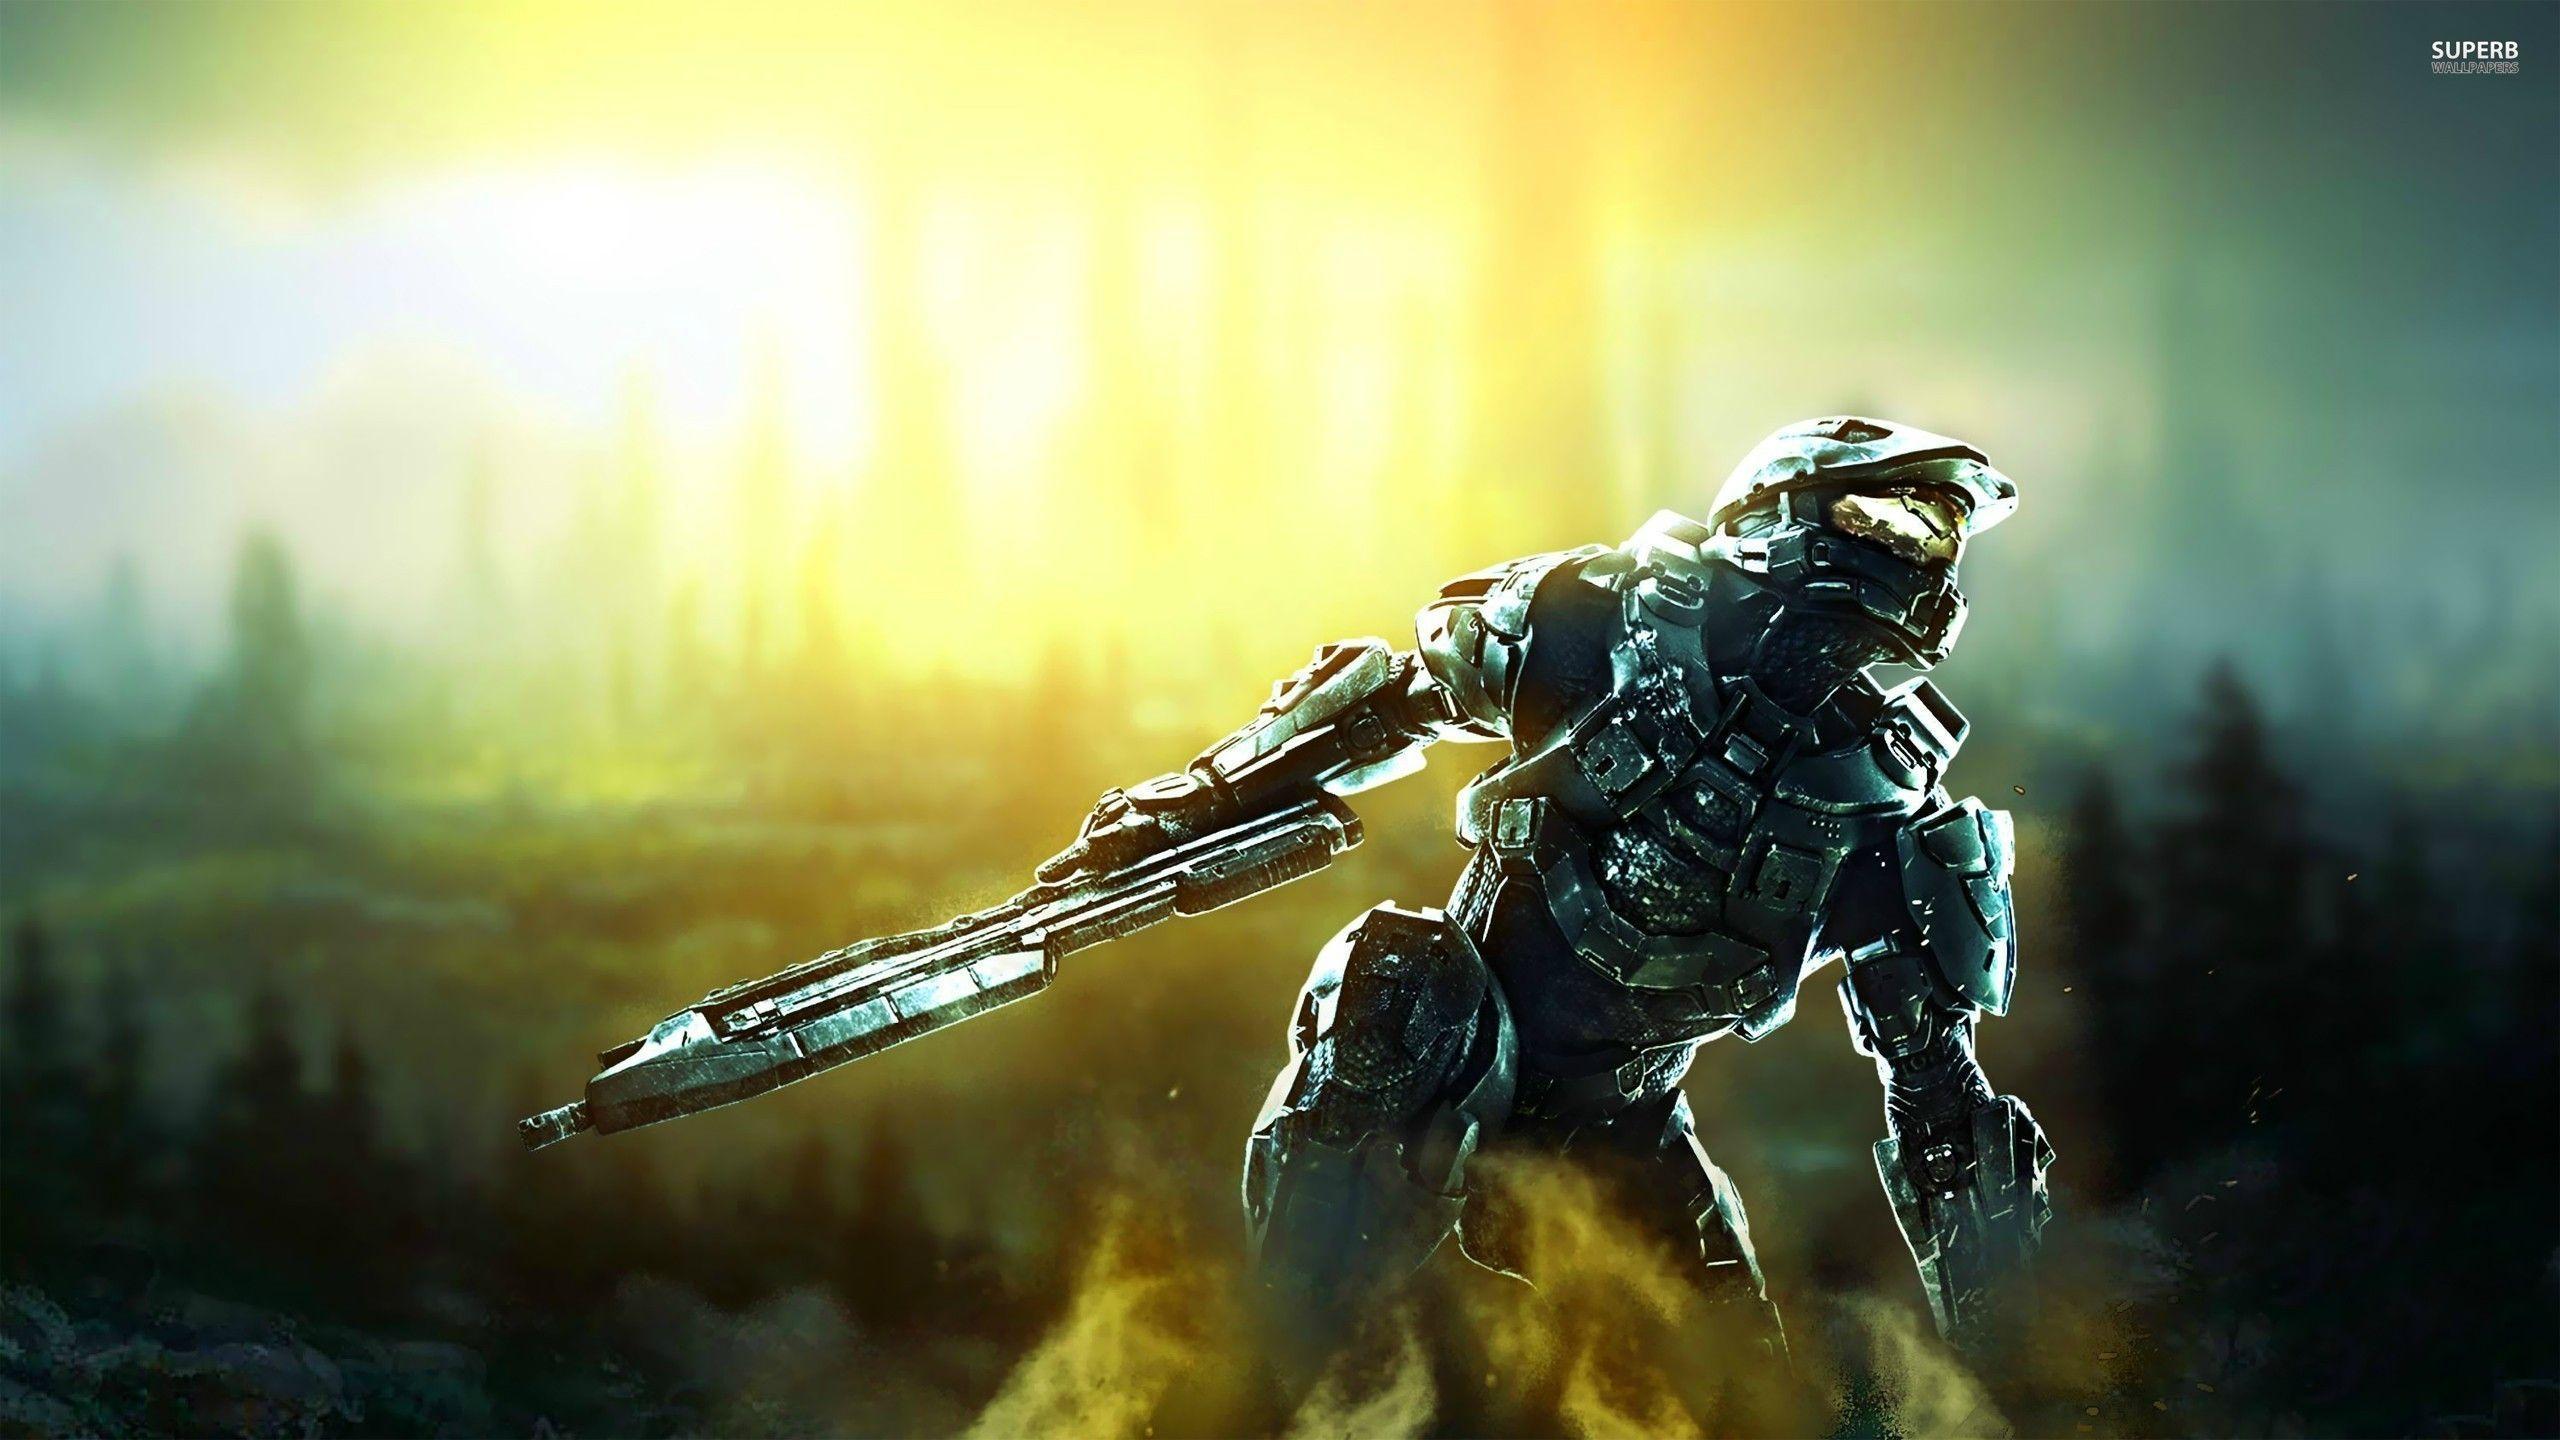 halo wallpaper,cg artwork,pc game,fictional character,action figure,digital compositing